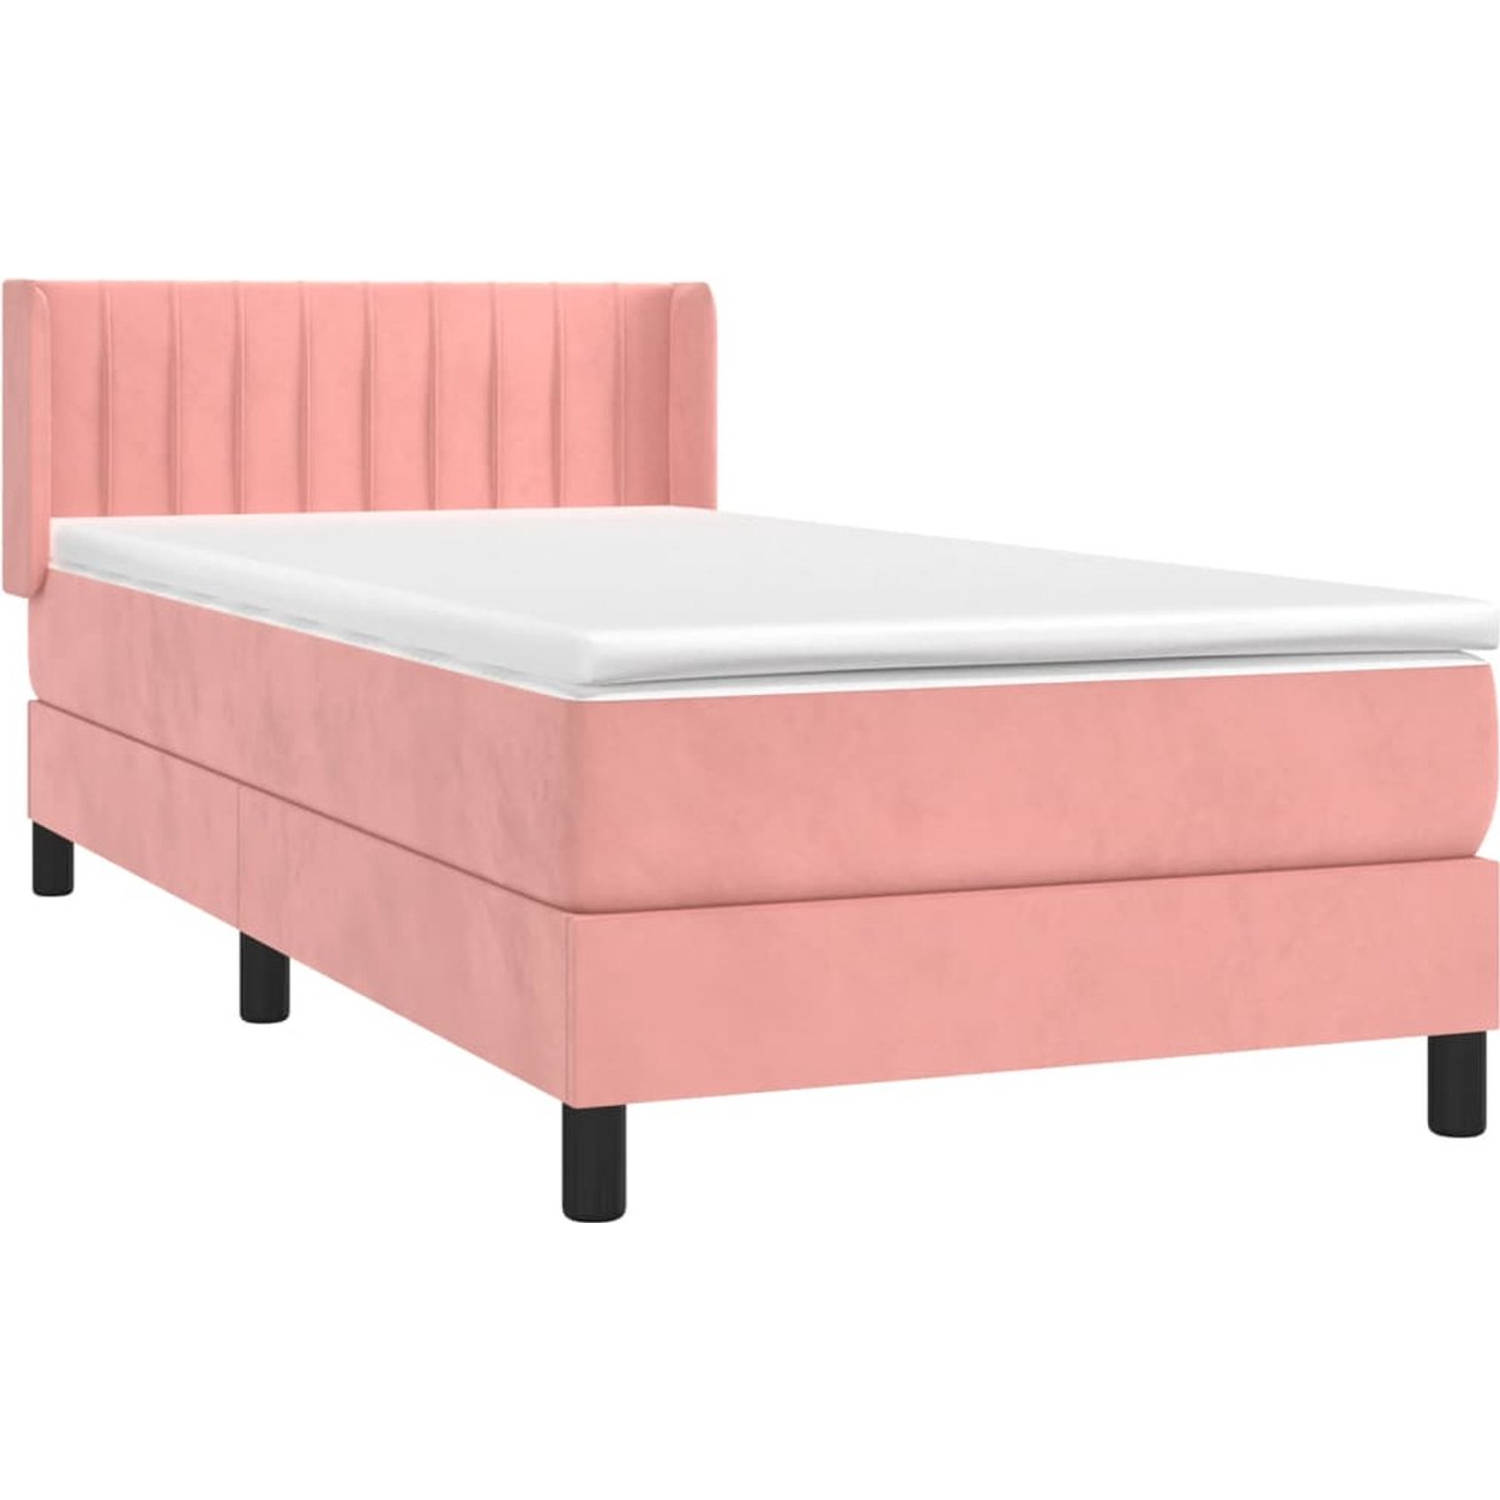 The Living Store Boxspringbed - fluweel - roze - 203x83x78/88 cm - pocketvering